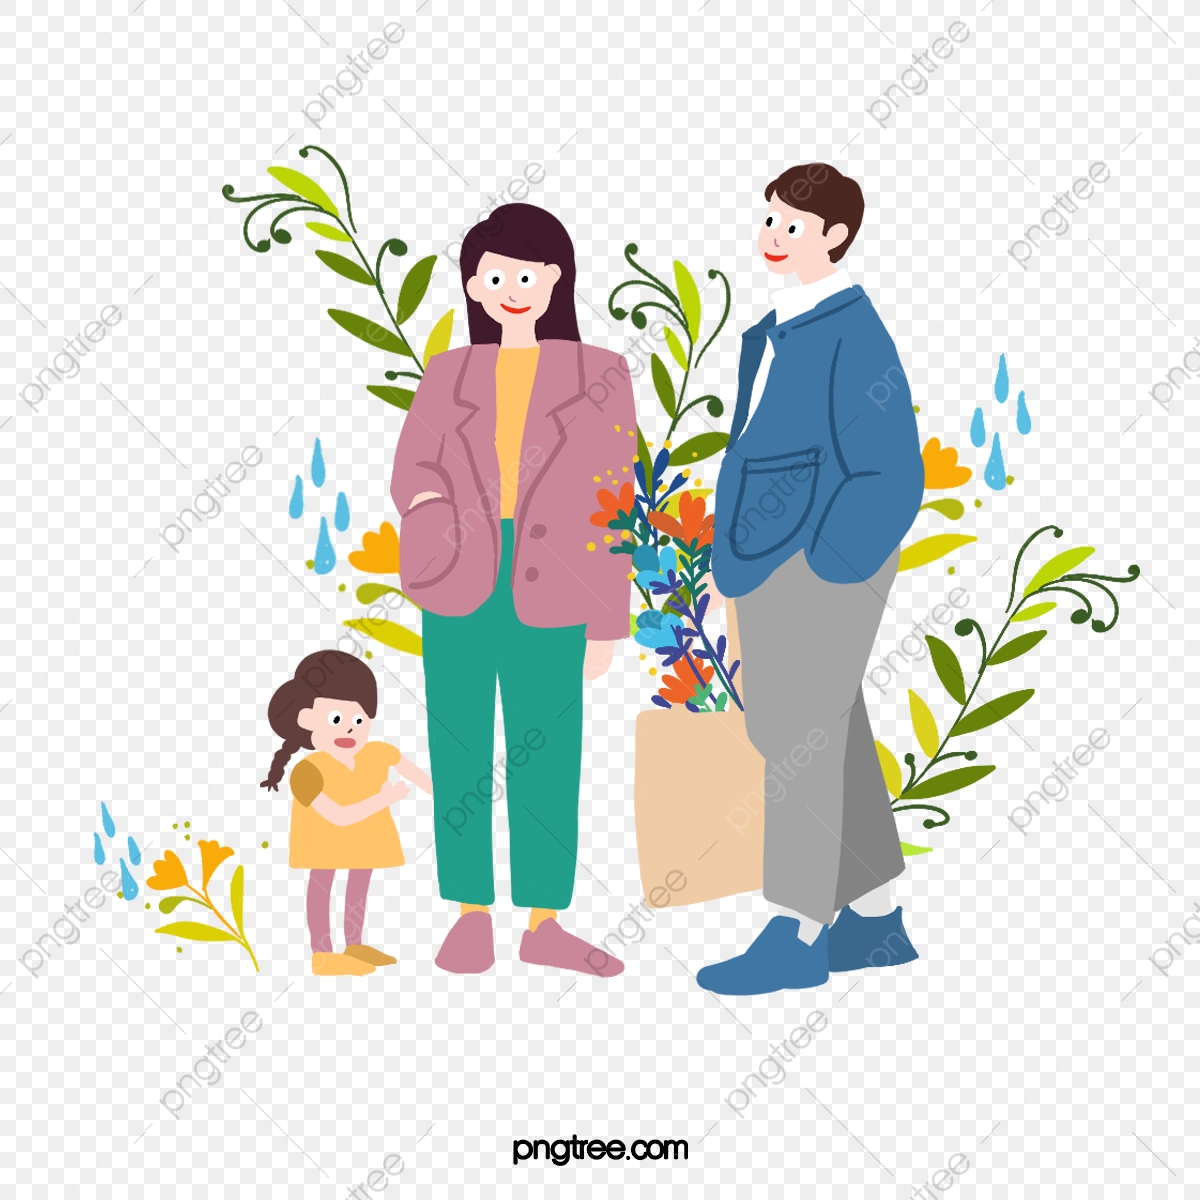 Parents Day PNG - 180447